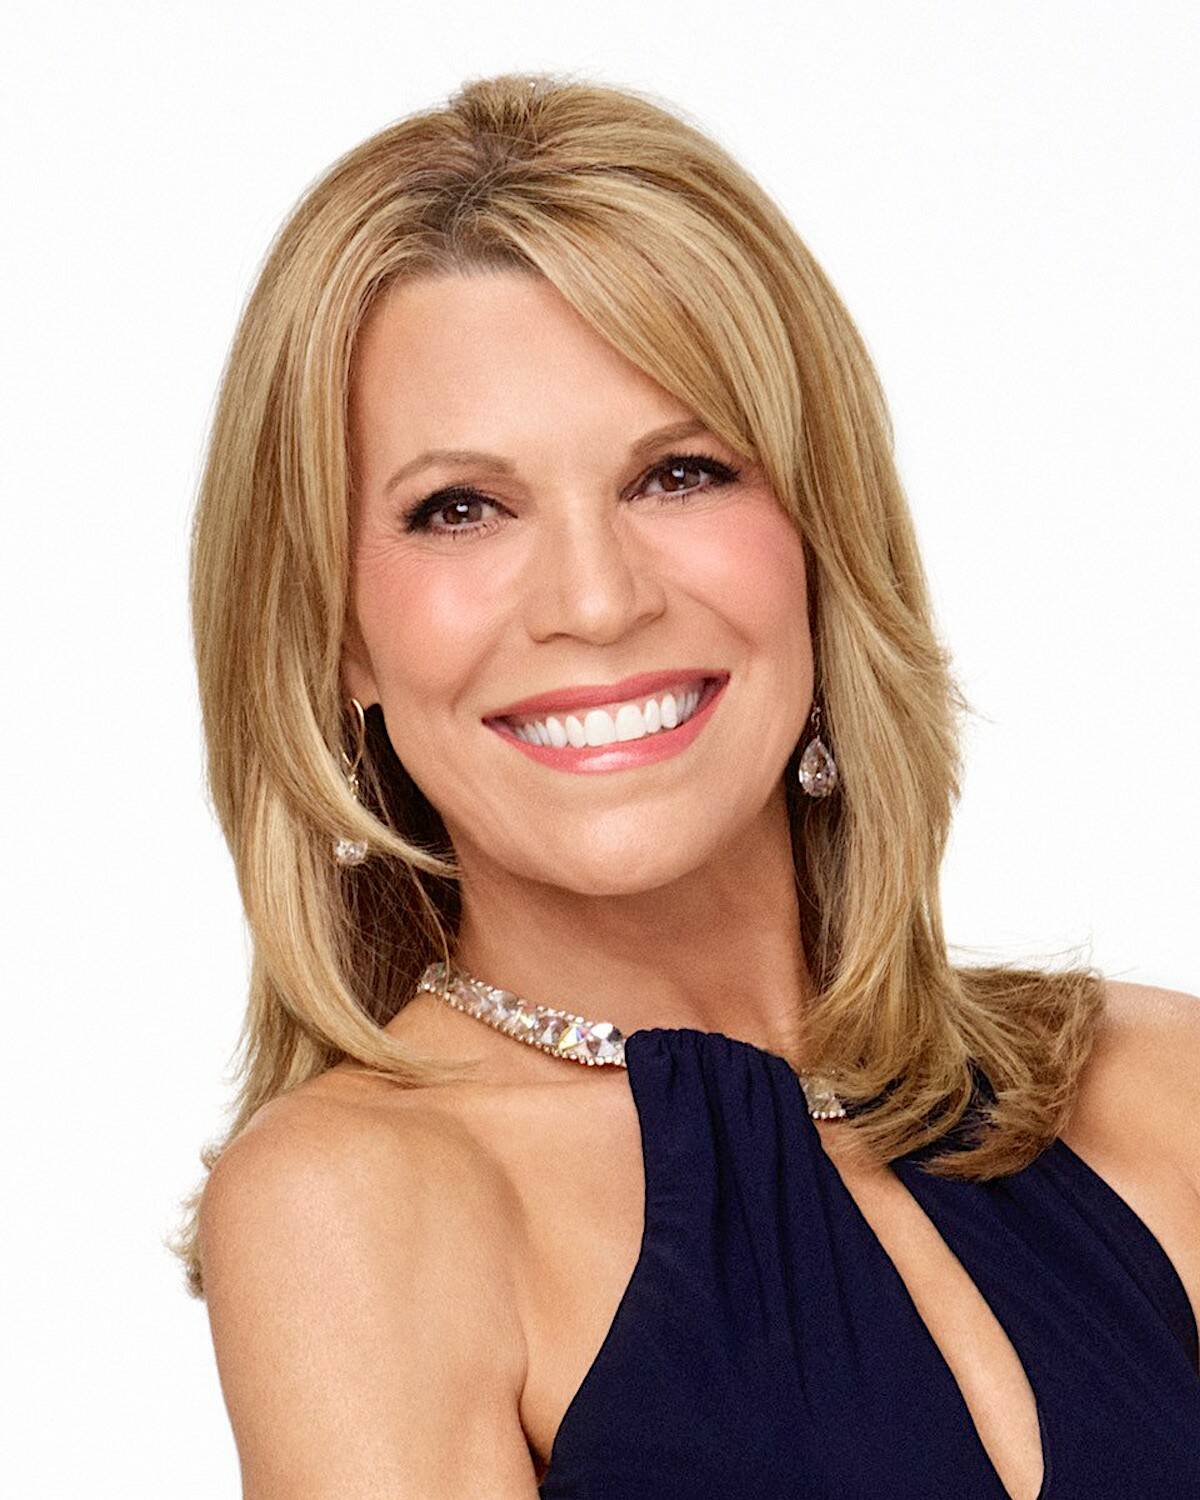 Game show personality Vanna White will make appearances at the BIG BC BINGO event at the PNE Coliseum Oct. 1-2. (Submitted photo)